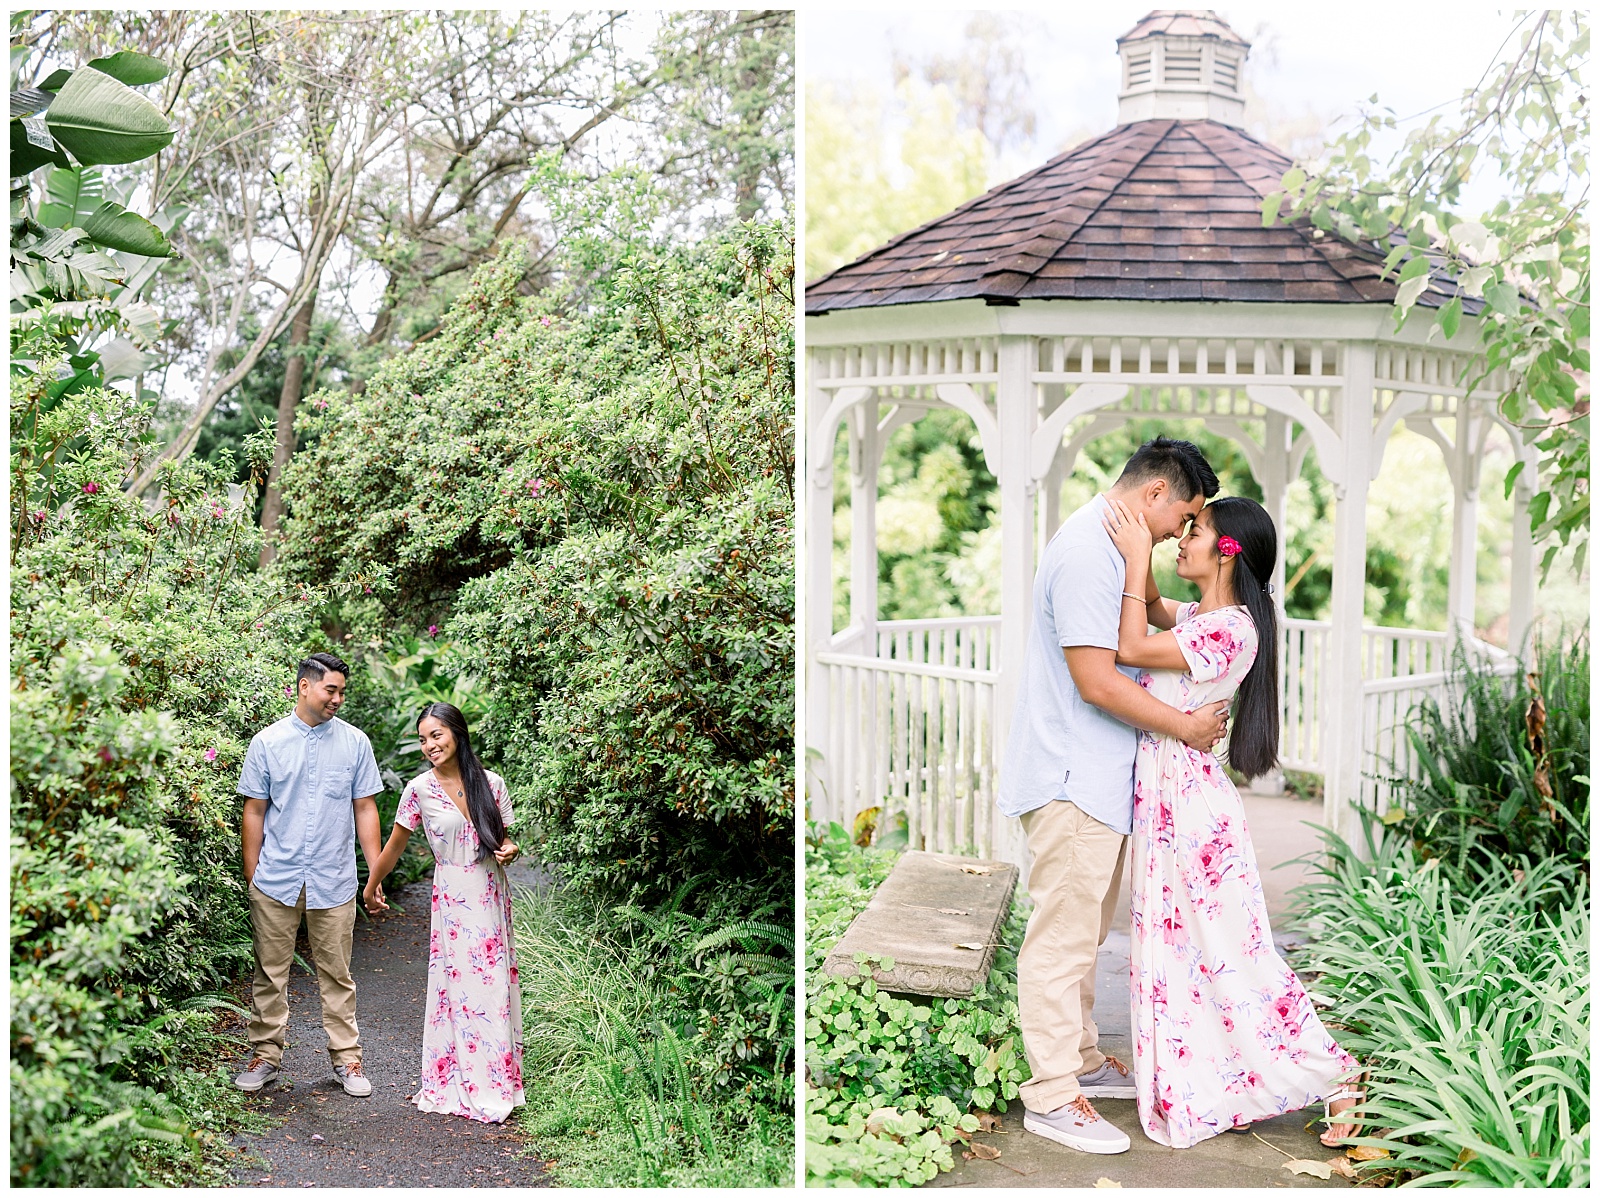 Couple holds hands while walking through botanical gardens and embrace in front of gazebo in  Maui Hawaii Engagement-Kula Botanical Gardens Engagement - Ali'i Kula Lavendar Farm Engagement | Maui Hawaii and Destination, Engagement, Elopement and Wedding Photographer Monica Roberts Photography | www.monicaroberts.com